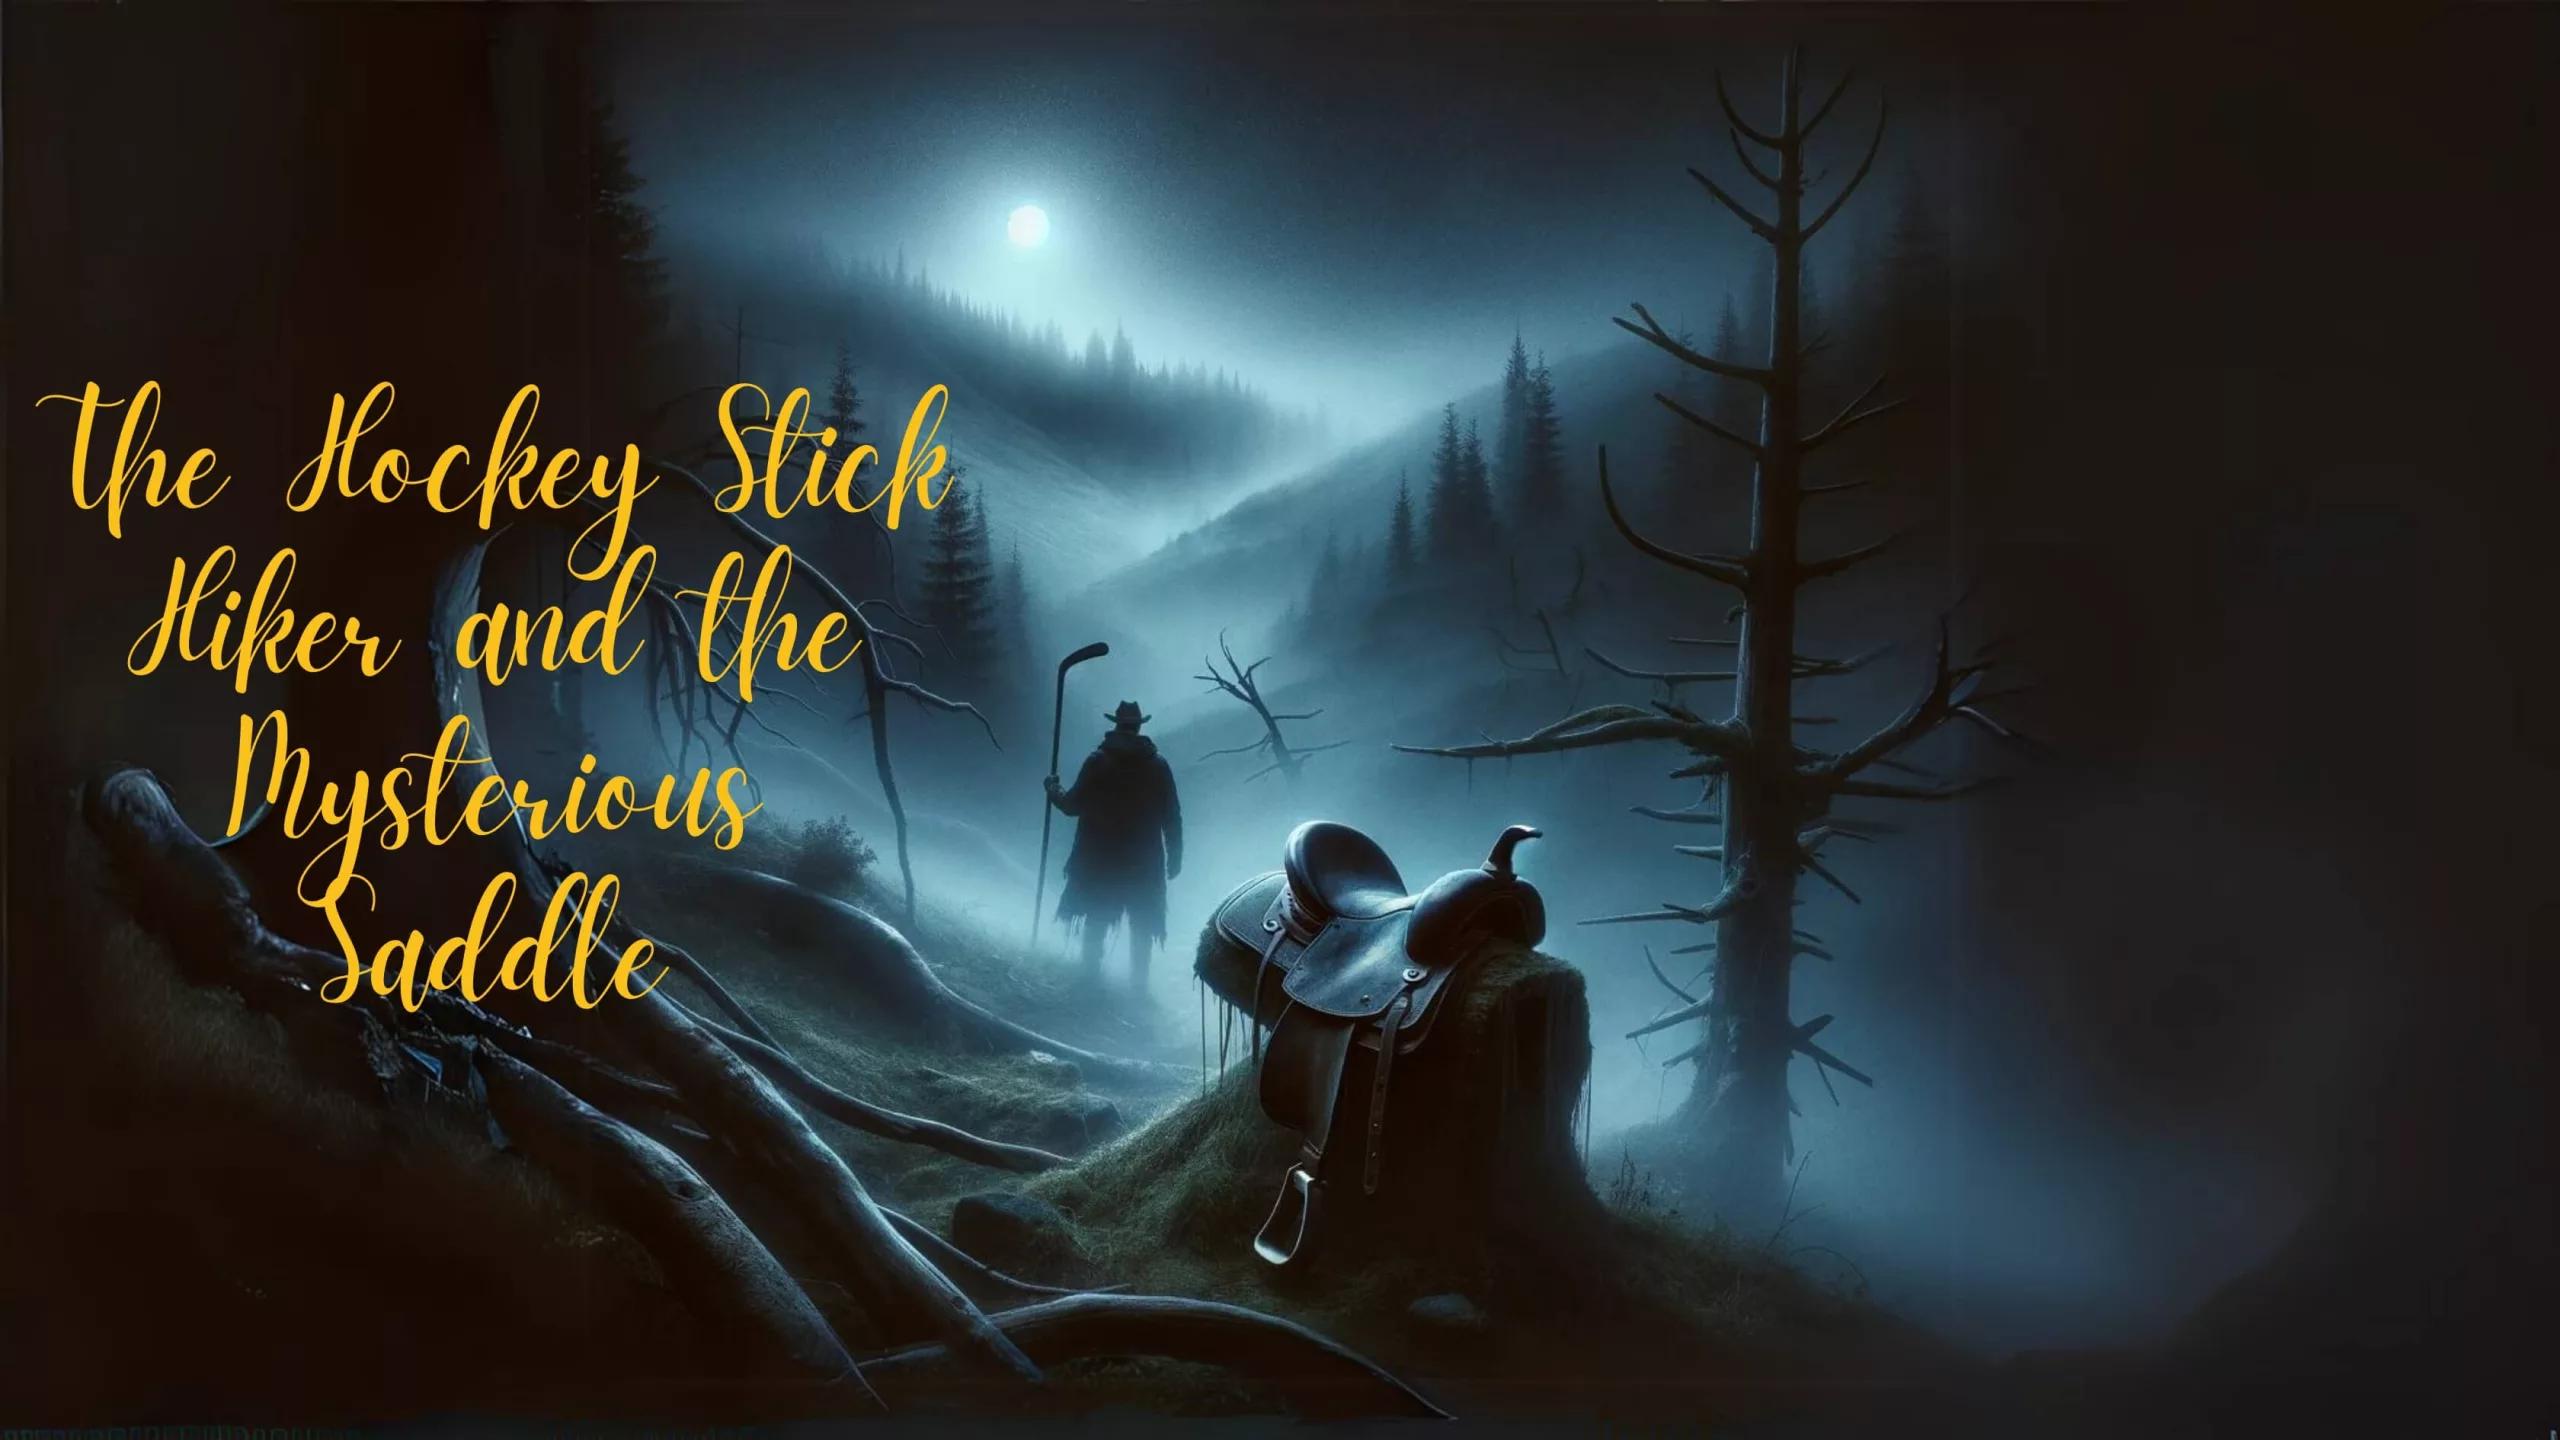 Myth 4: The Hockey Stick Hiker and the Mysterious Saddle